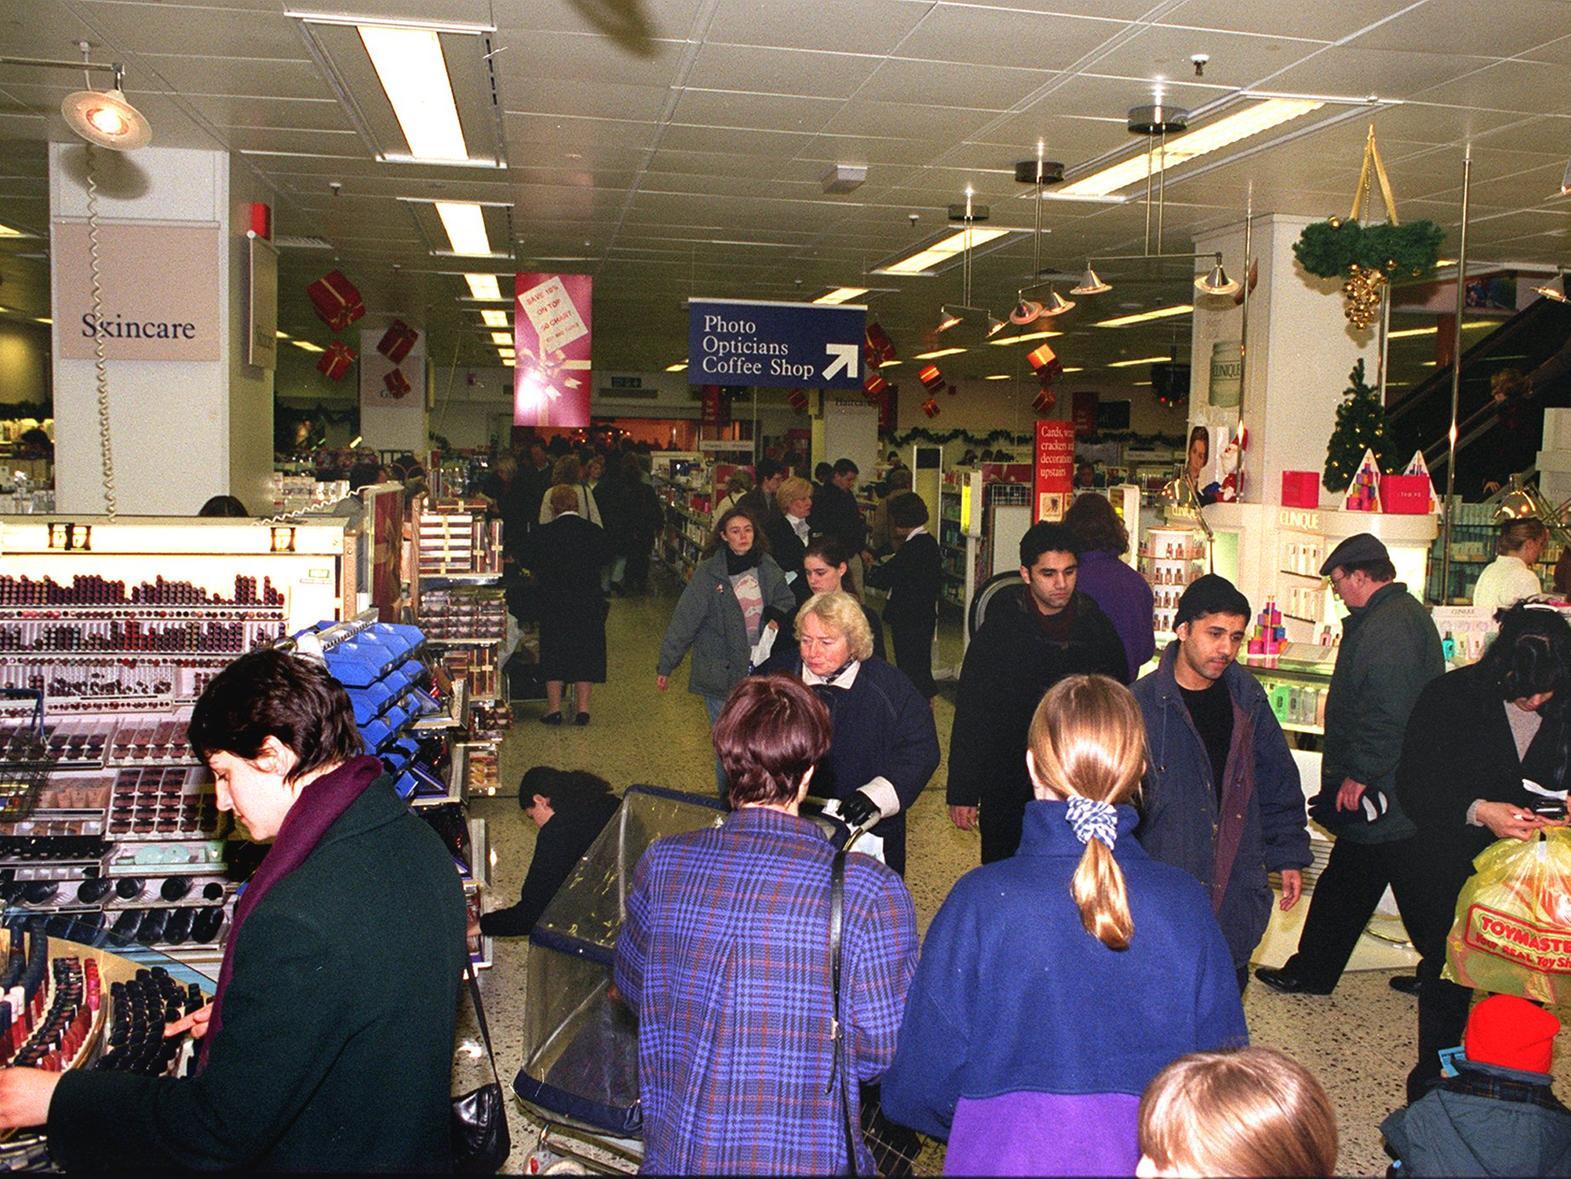 Boots on Albion Street was buzzing with Christmas shoppers in December 1996.